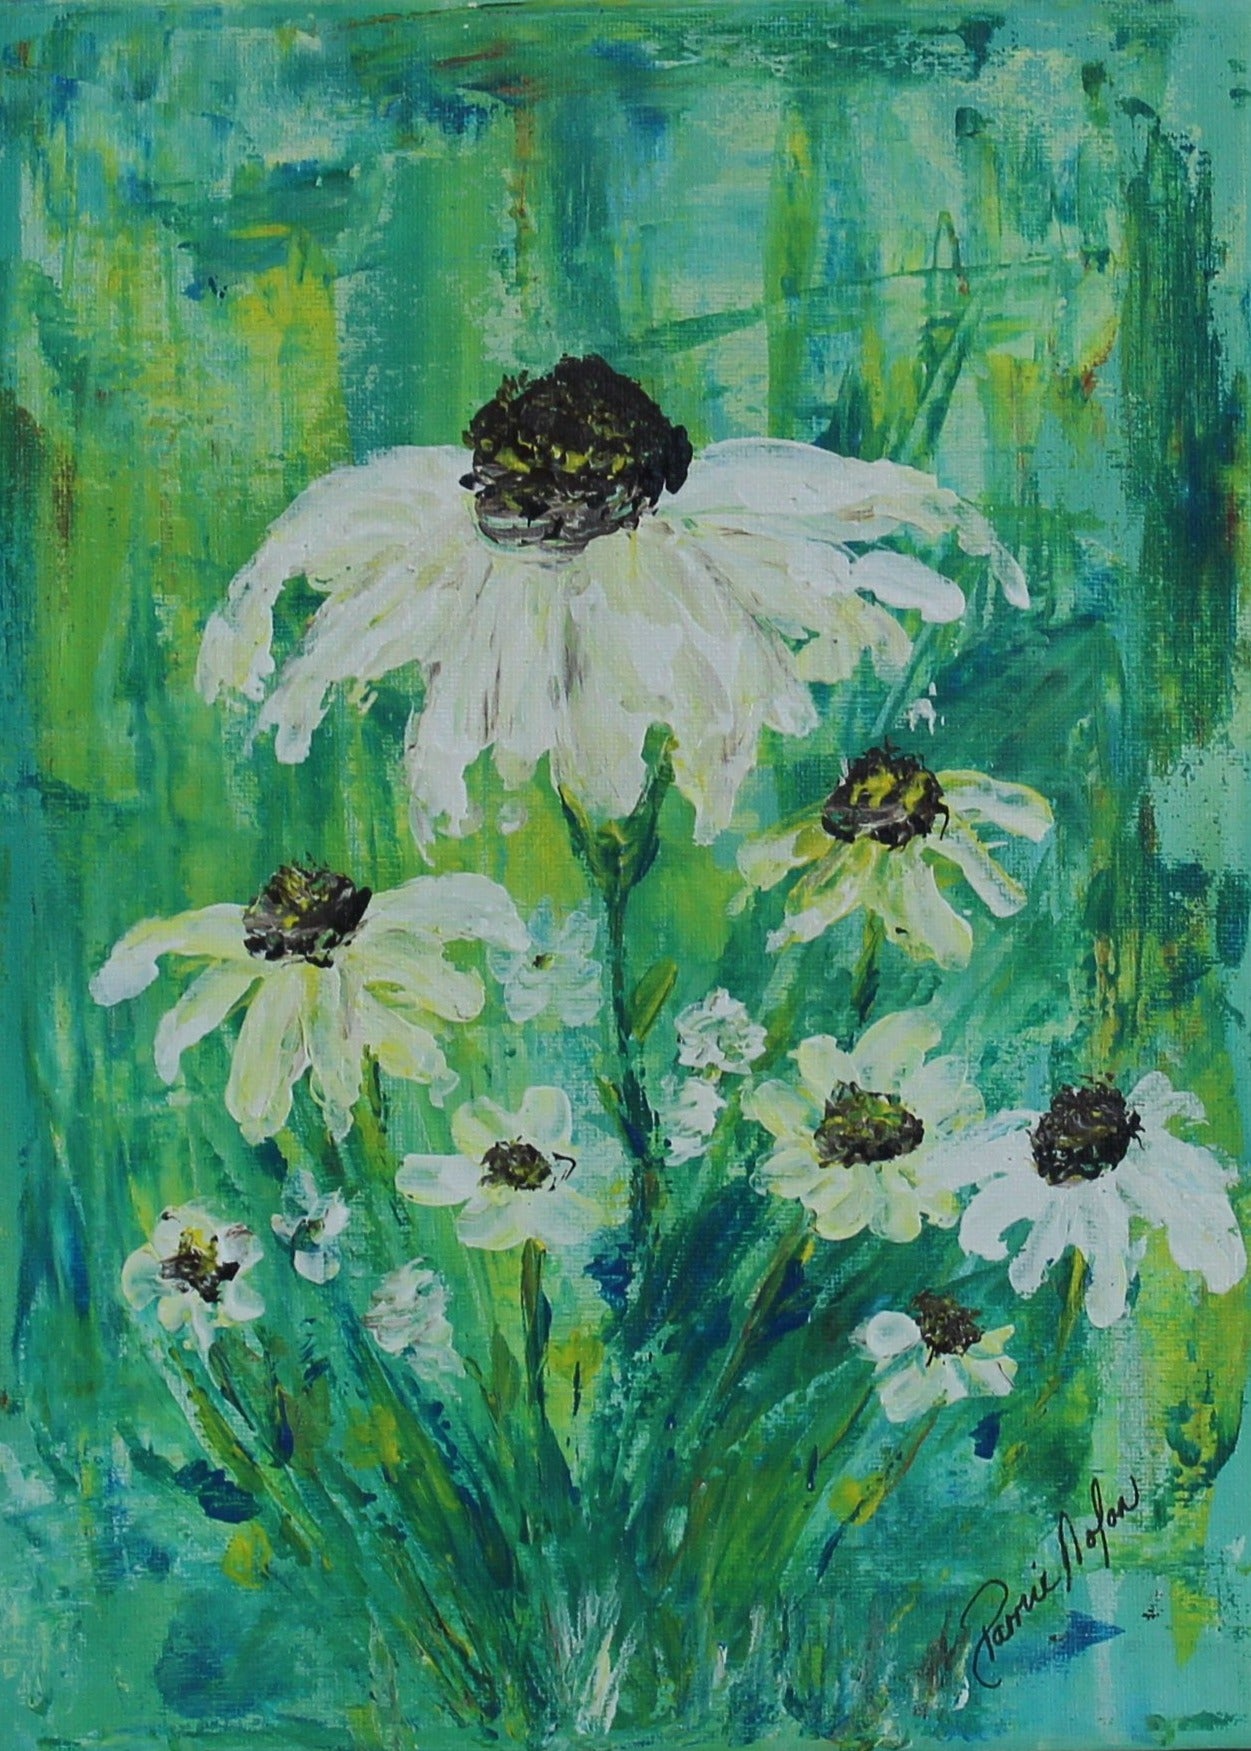 Daisies by Palette Knife